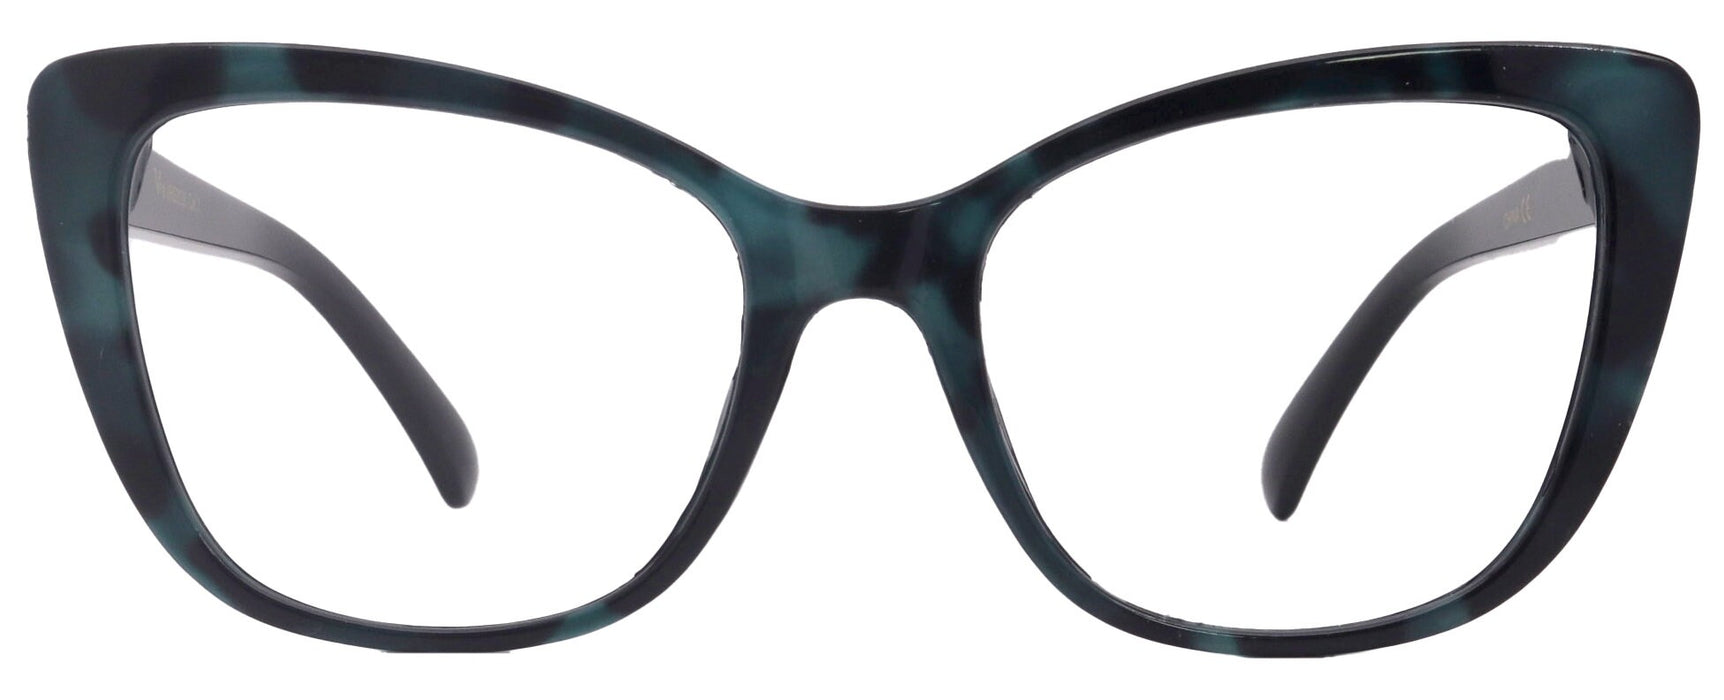 Parisian Fashion High End Bifocal or Non-Bifocal Black W Turquoise Reading Glasses Cat-Eye Chic, Inspired by NY Fifth Avenue